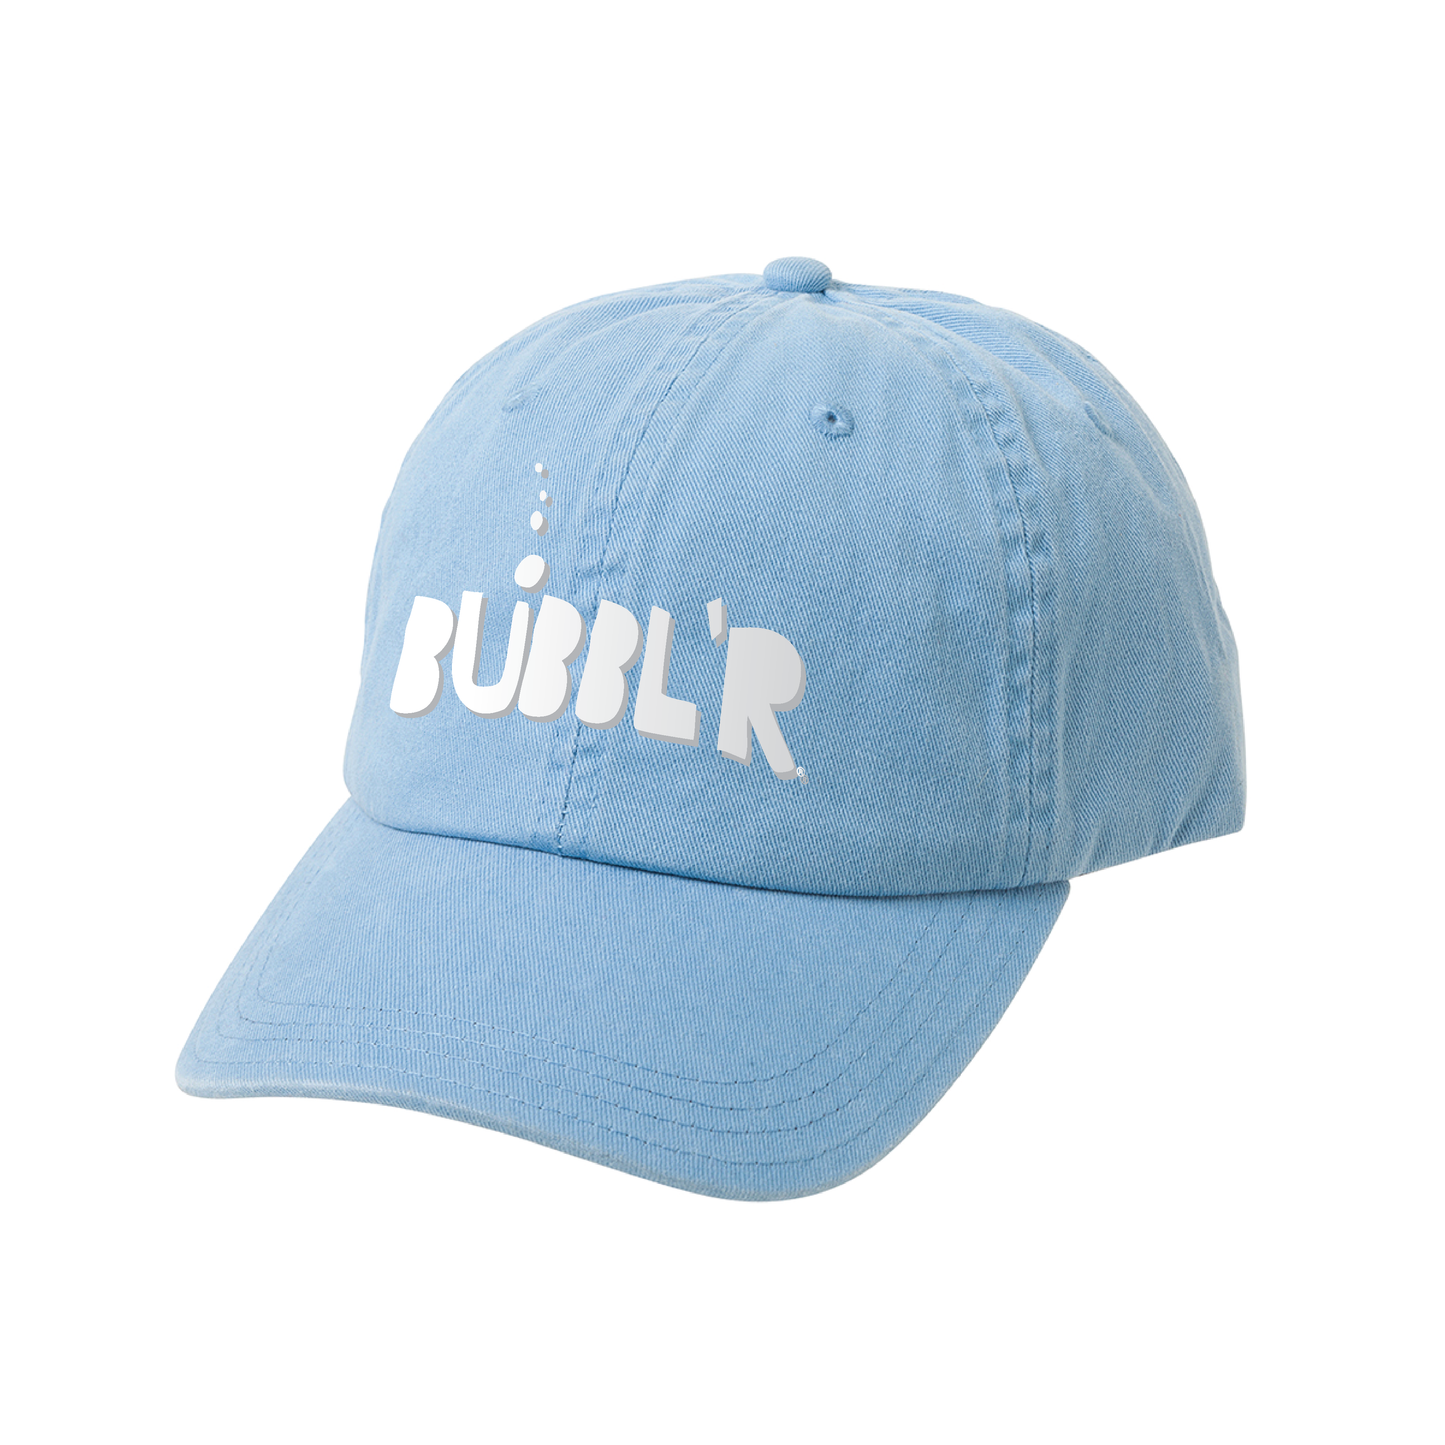 a blue baseball cap with the bubbl'r logo across the front